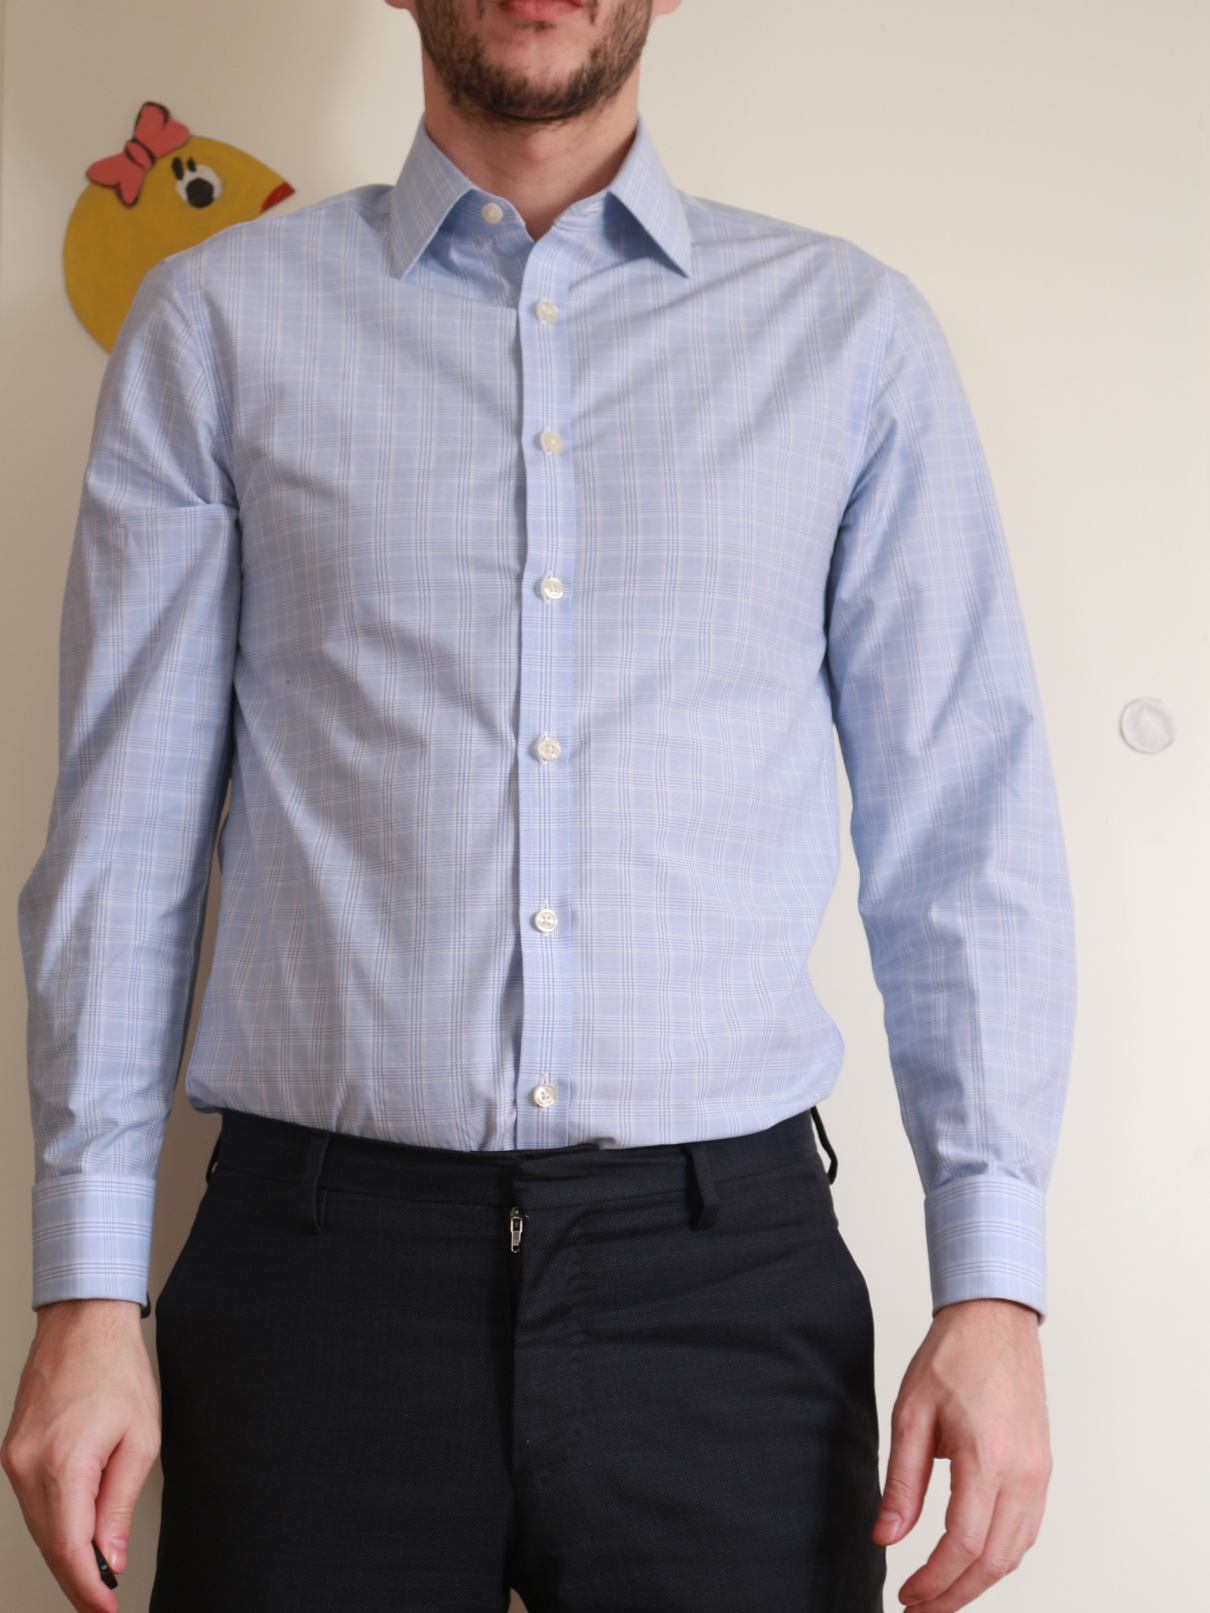 Charles Tyrwhitt Review: Extra Slim Fit Front View